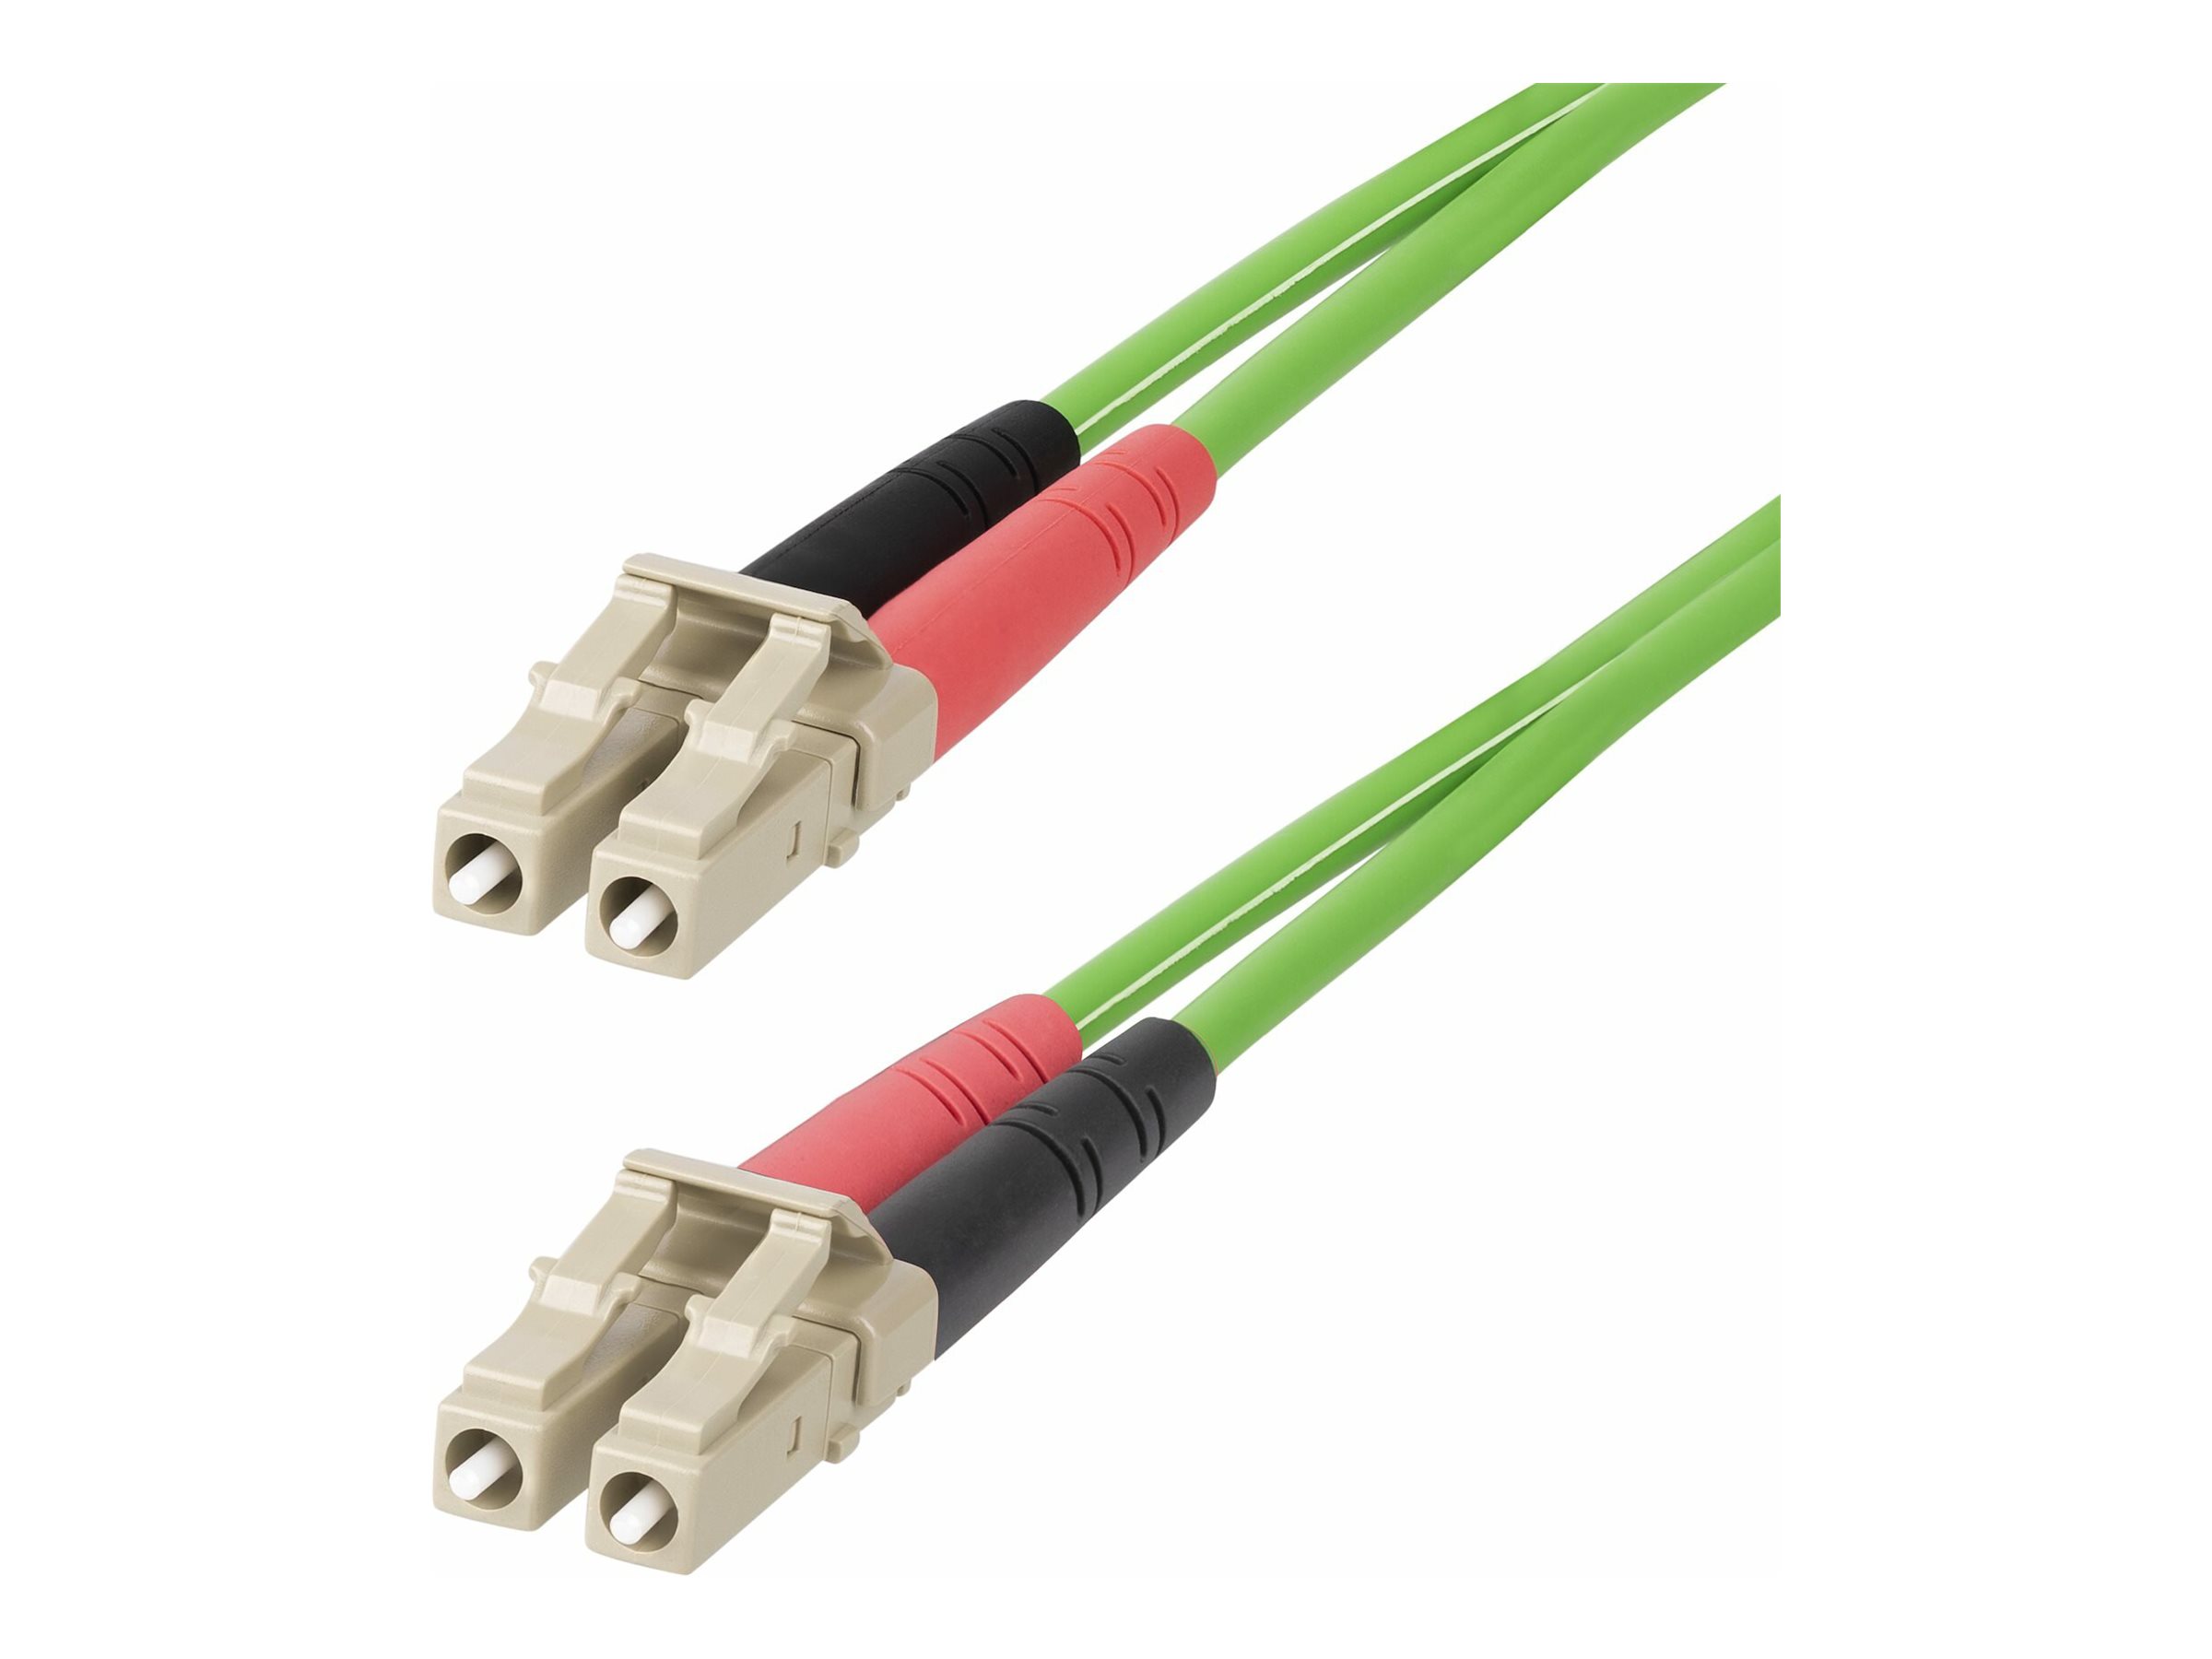 StarTech.com 7m (22ft) LC to LC (UPC) OM5 Multimode Fiber Optic Cable, 50/125m Duplex LOMMF Zipcord, VCSEL, 40G/100G, Bend Inse